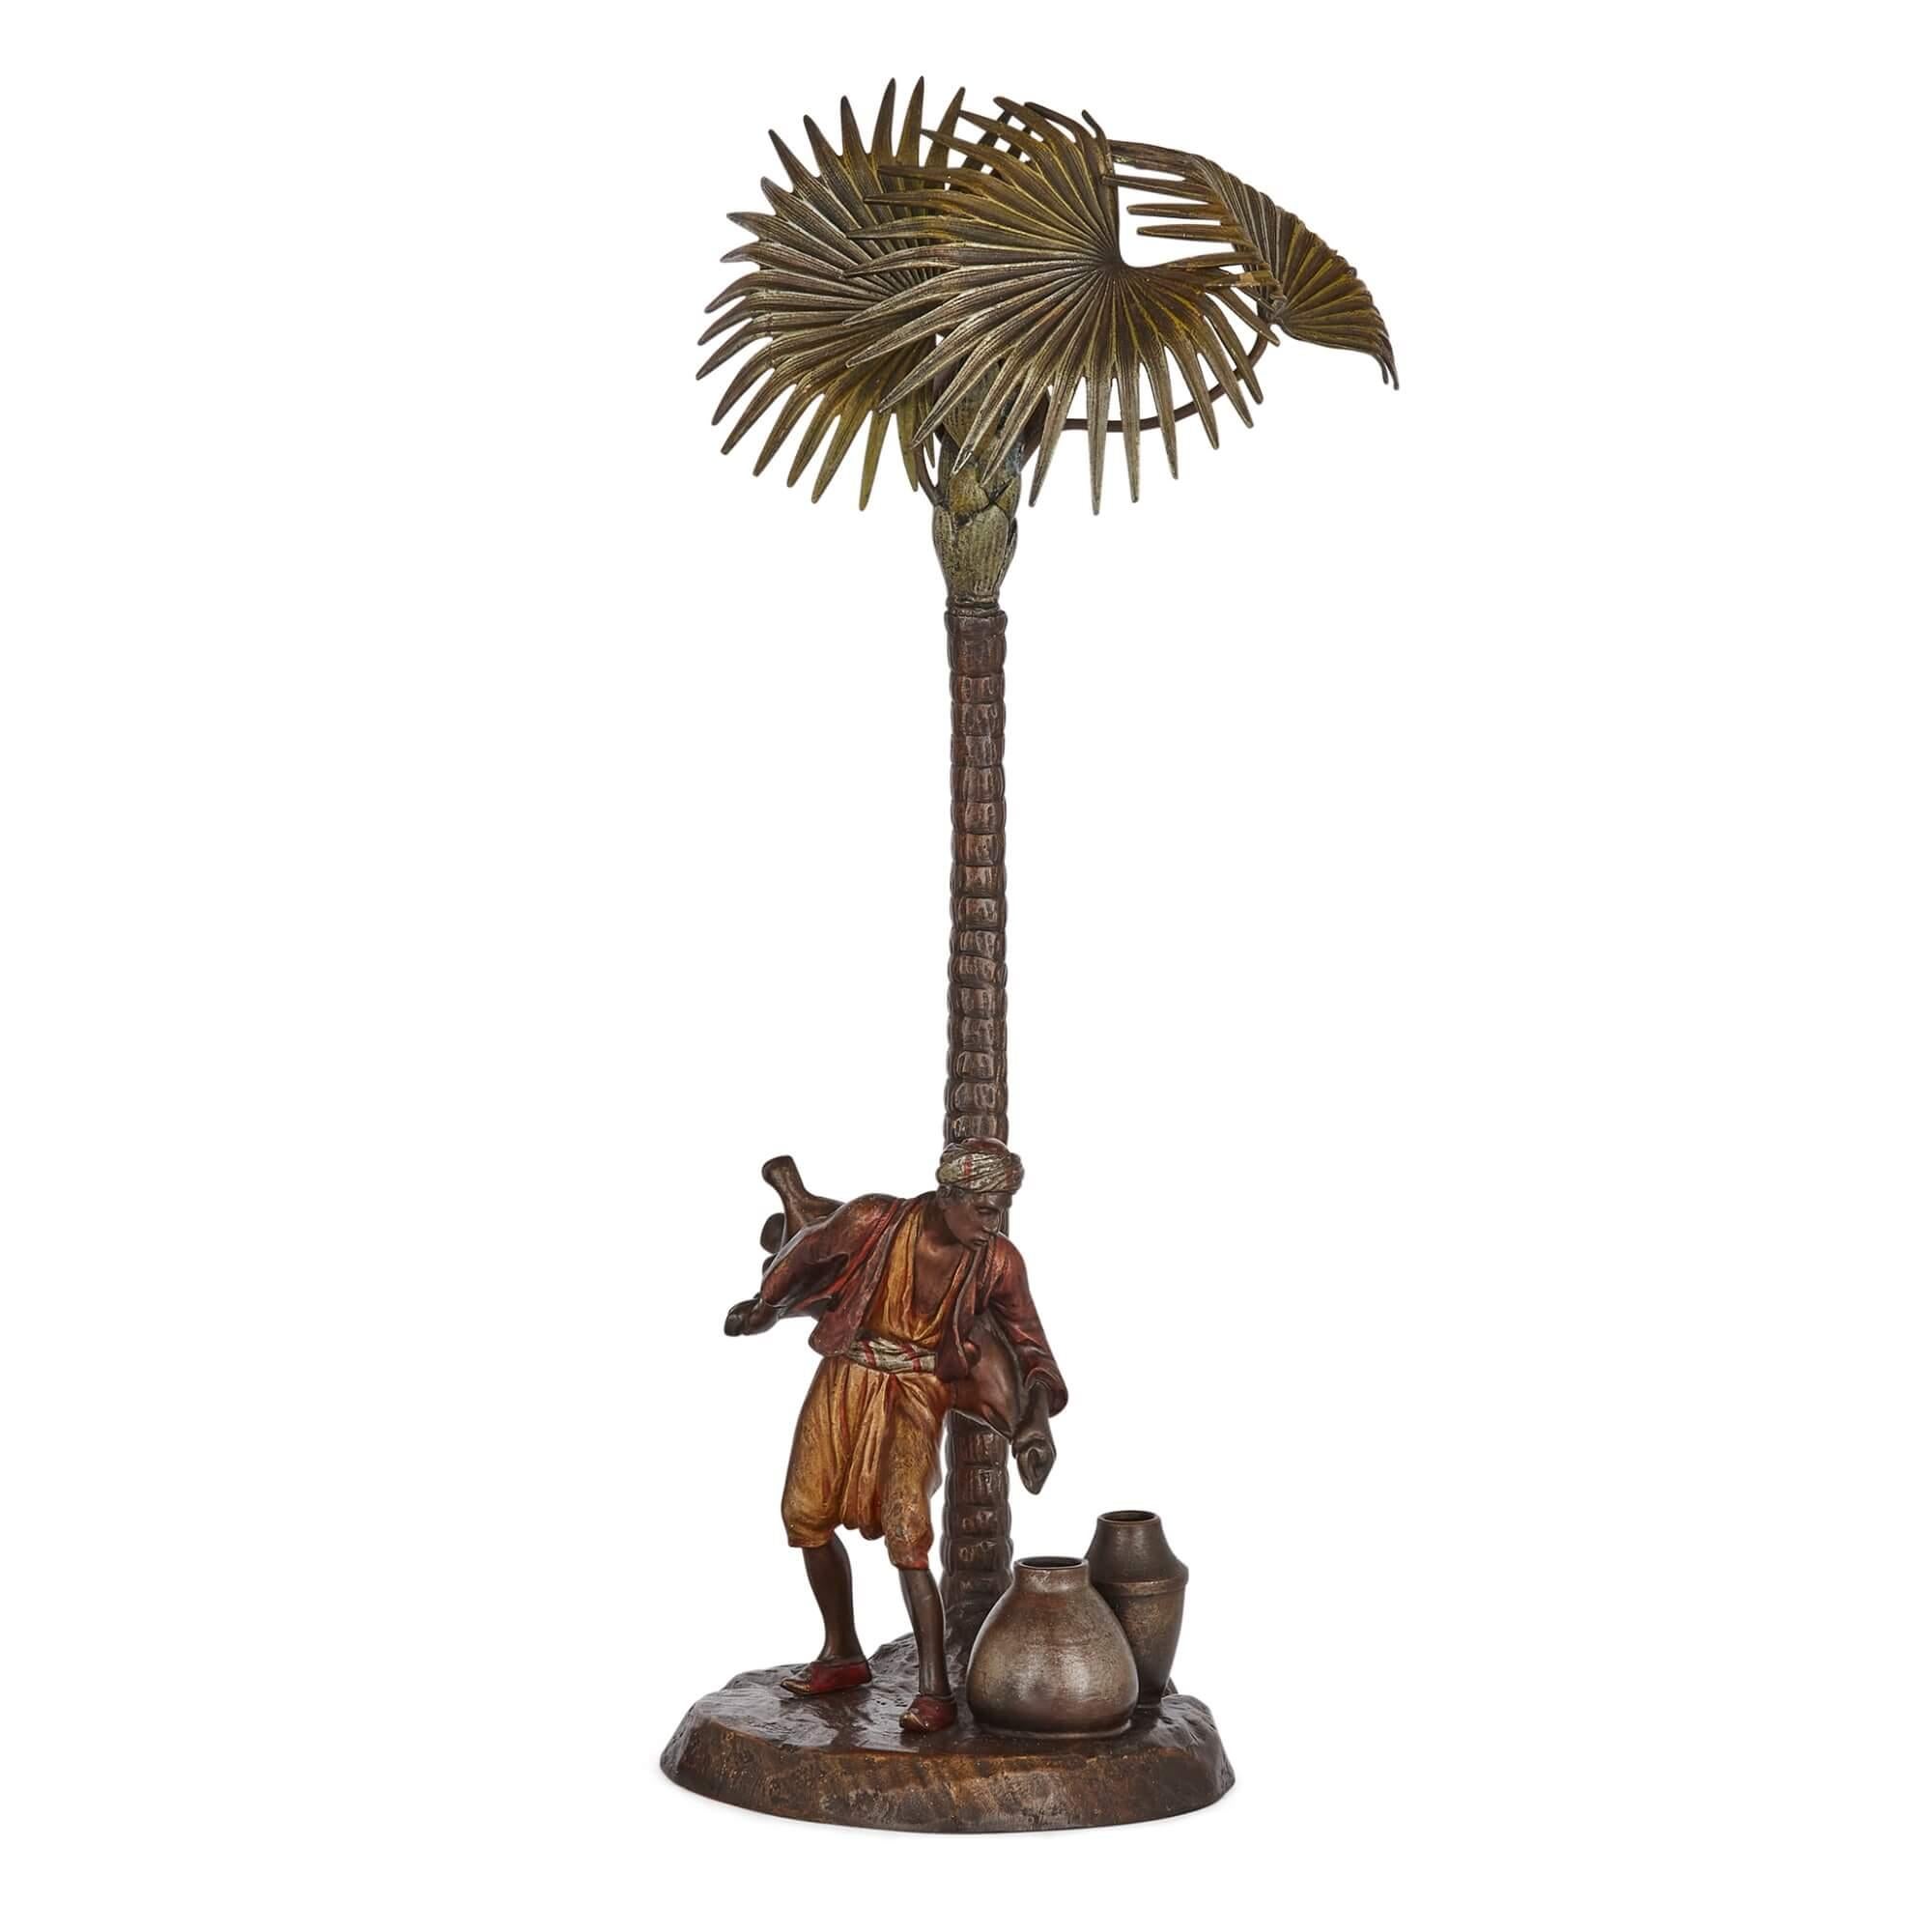 Large Viennese Orientalist lamp in cold-painted bronze 
Austrian, c. 1910
Height 44cm, width 18cm, depth 15cm 

This excellent antique bronze sculpture depicts a simple yet highly authentic scene.

The lamp depicts an Arab transferring water to a